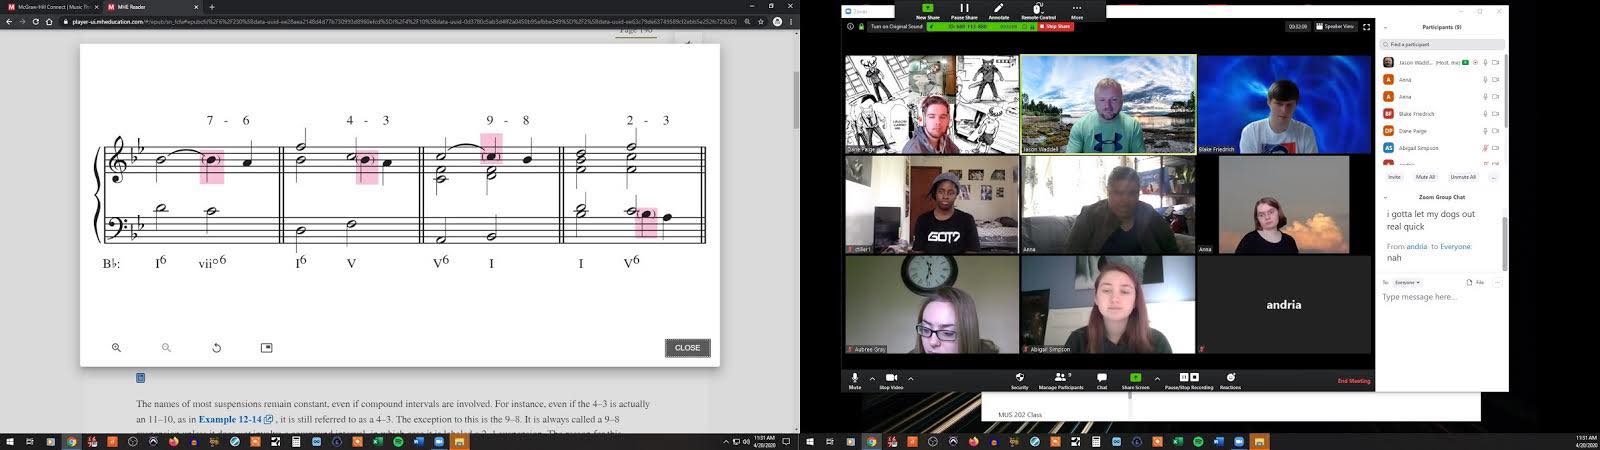 Music notation and virtual class via Zoom